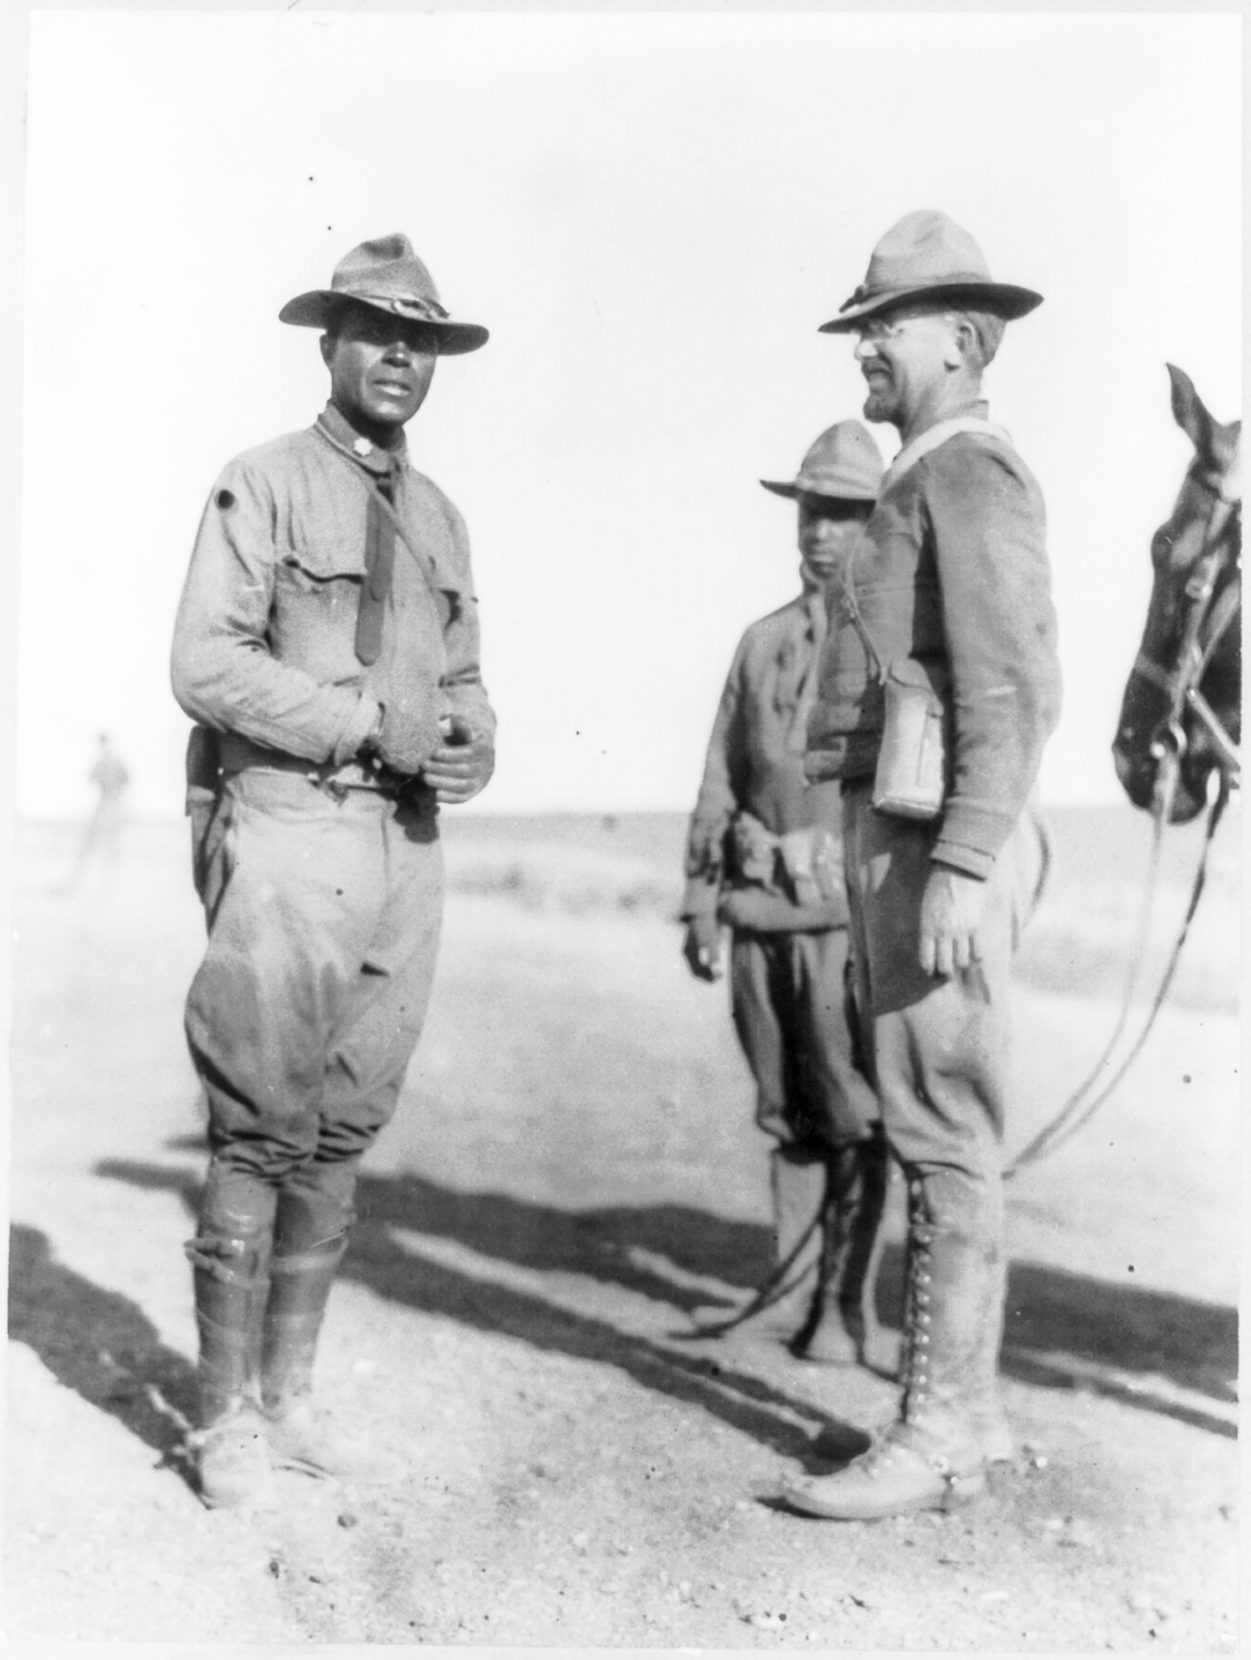 Major Charles Young (left) and Captain John R. Barber during the Mexican Revolution. Photo: Underwood & Underwood/Library of Congress.